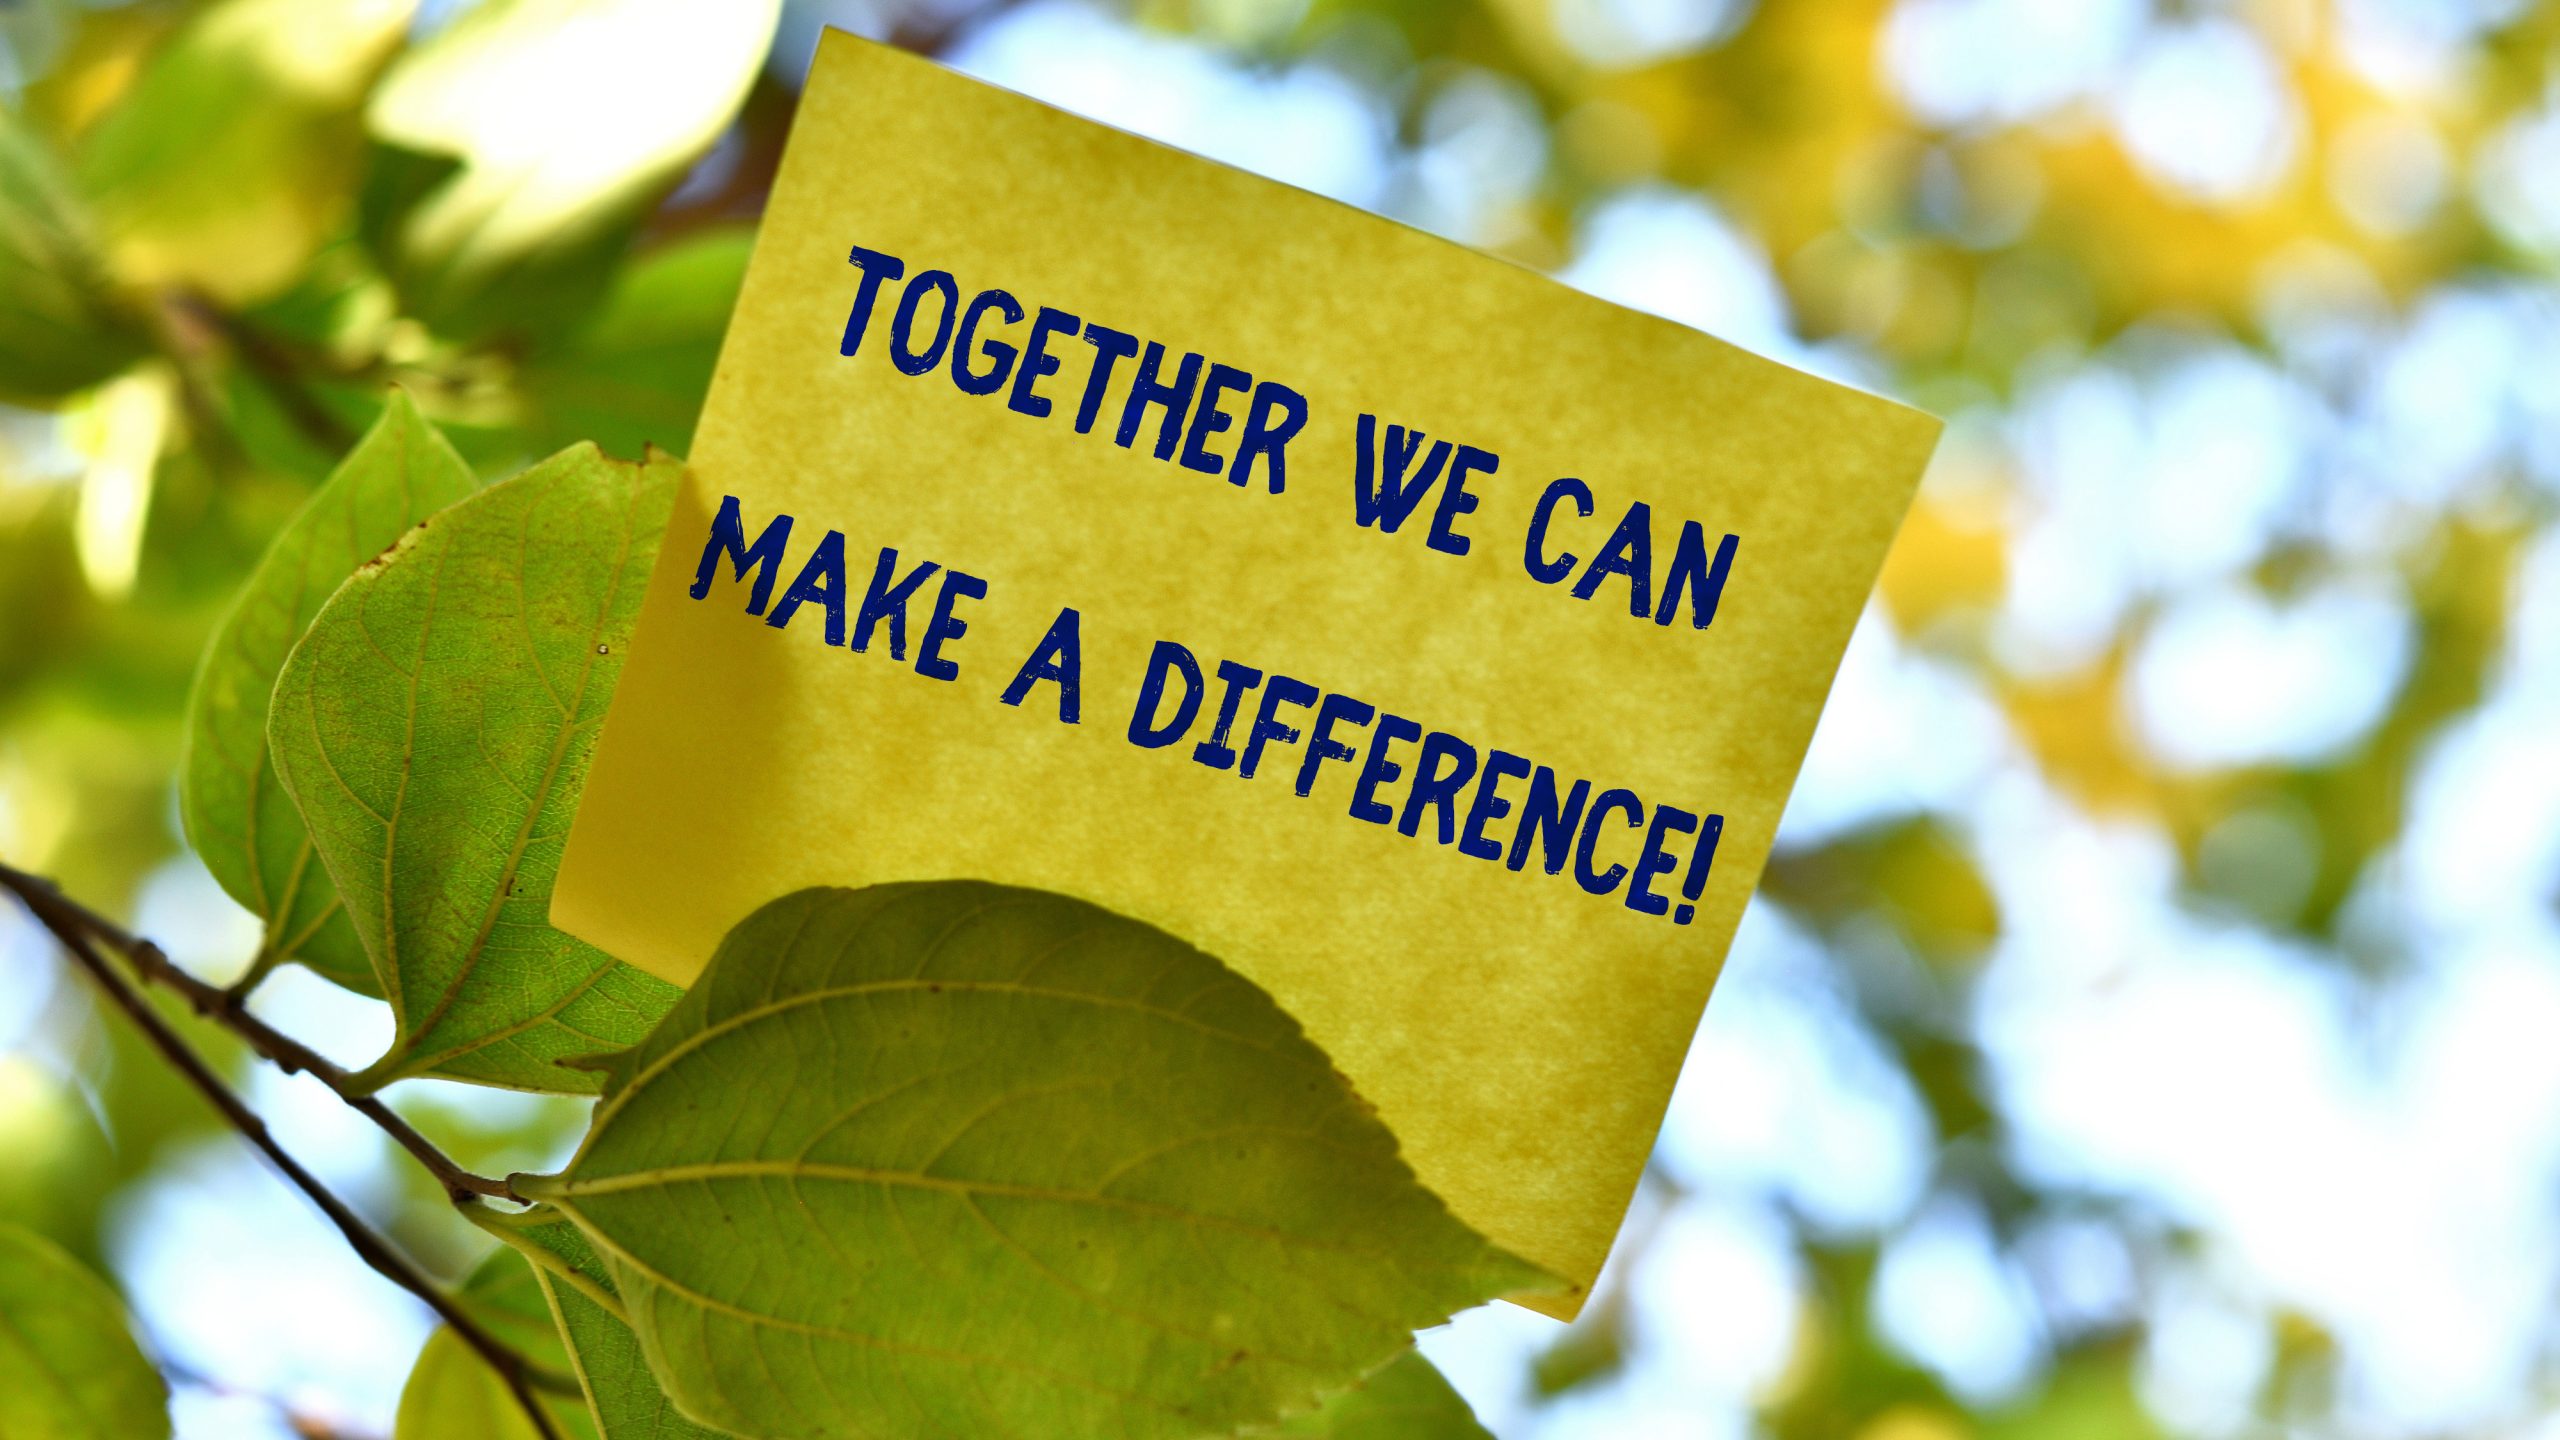 together-we-can-make-a-difference